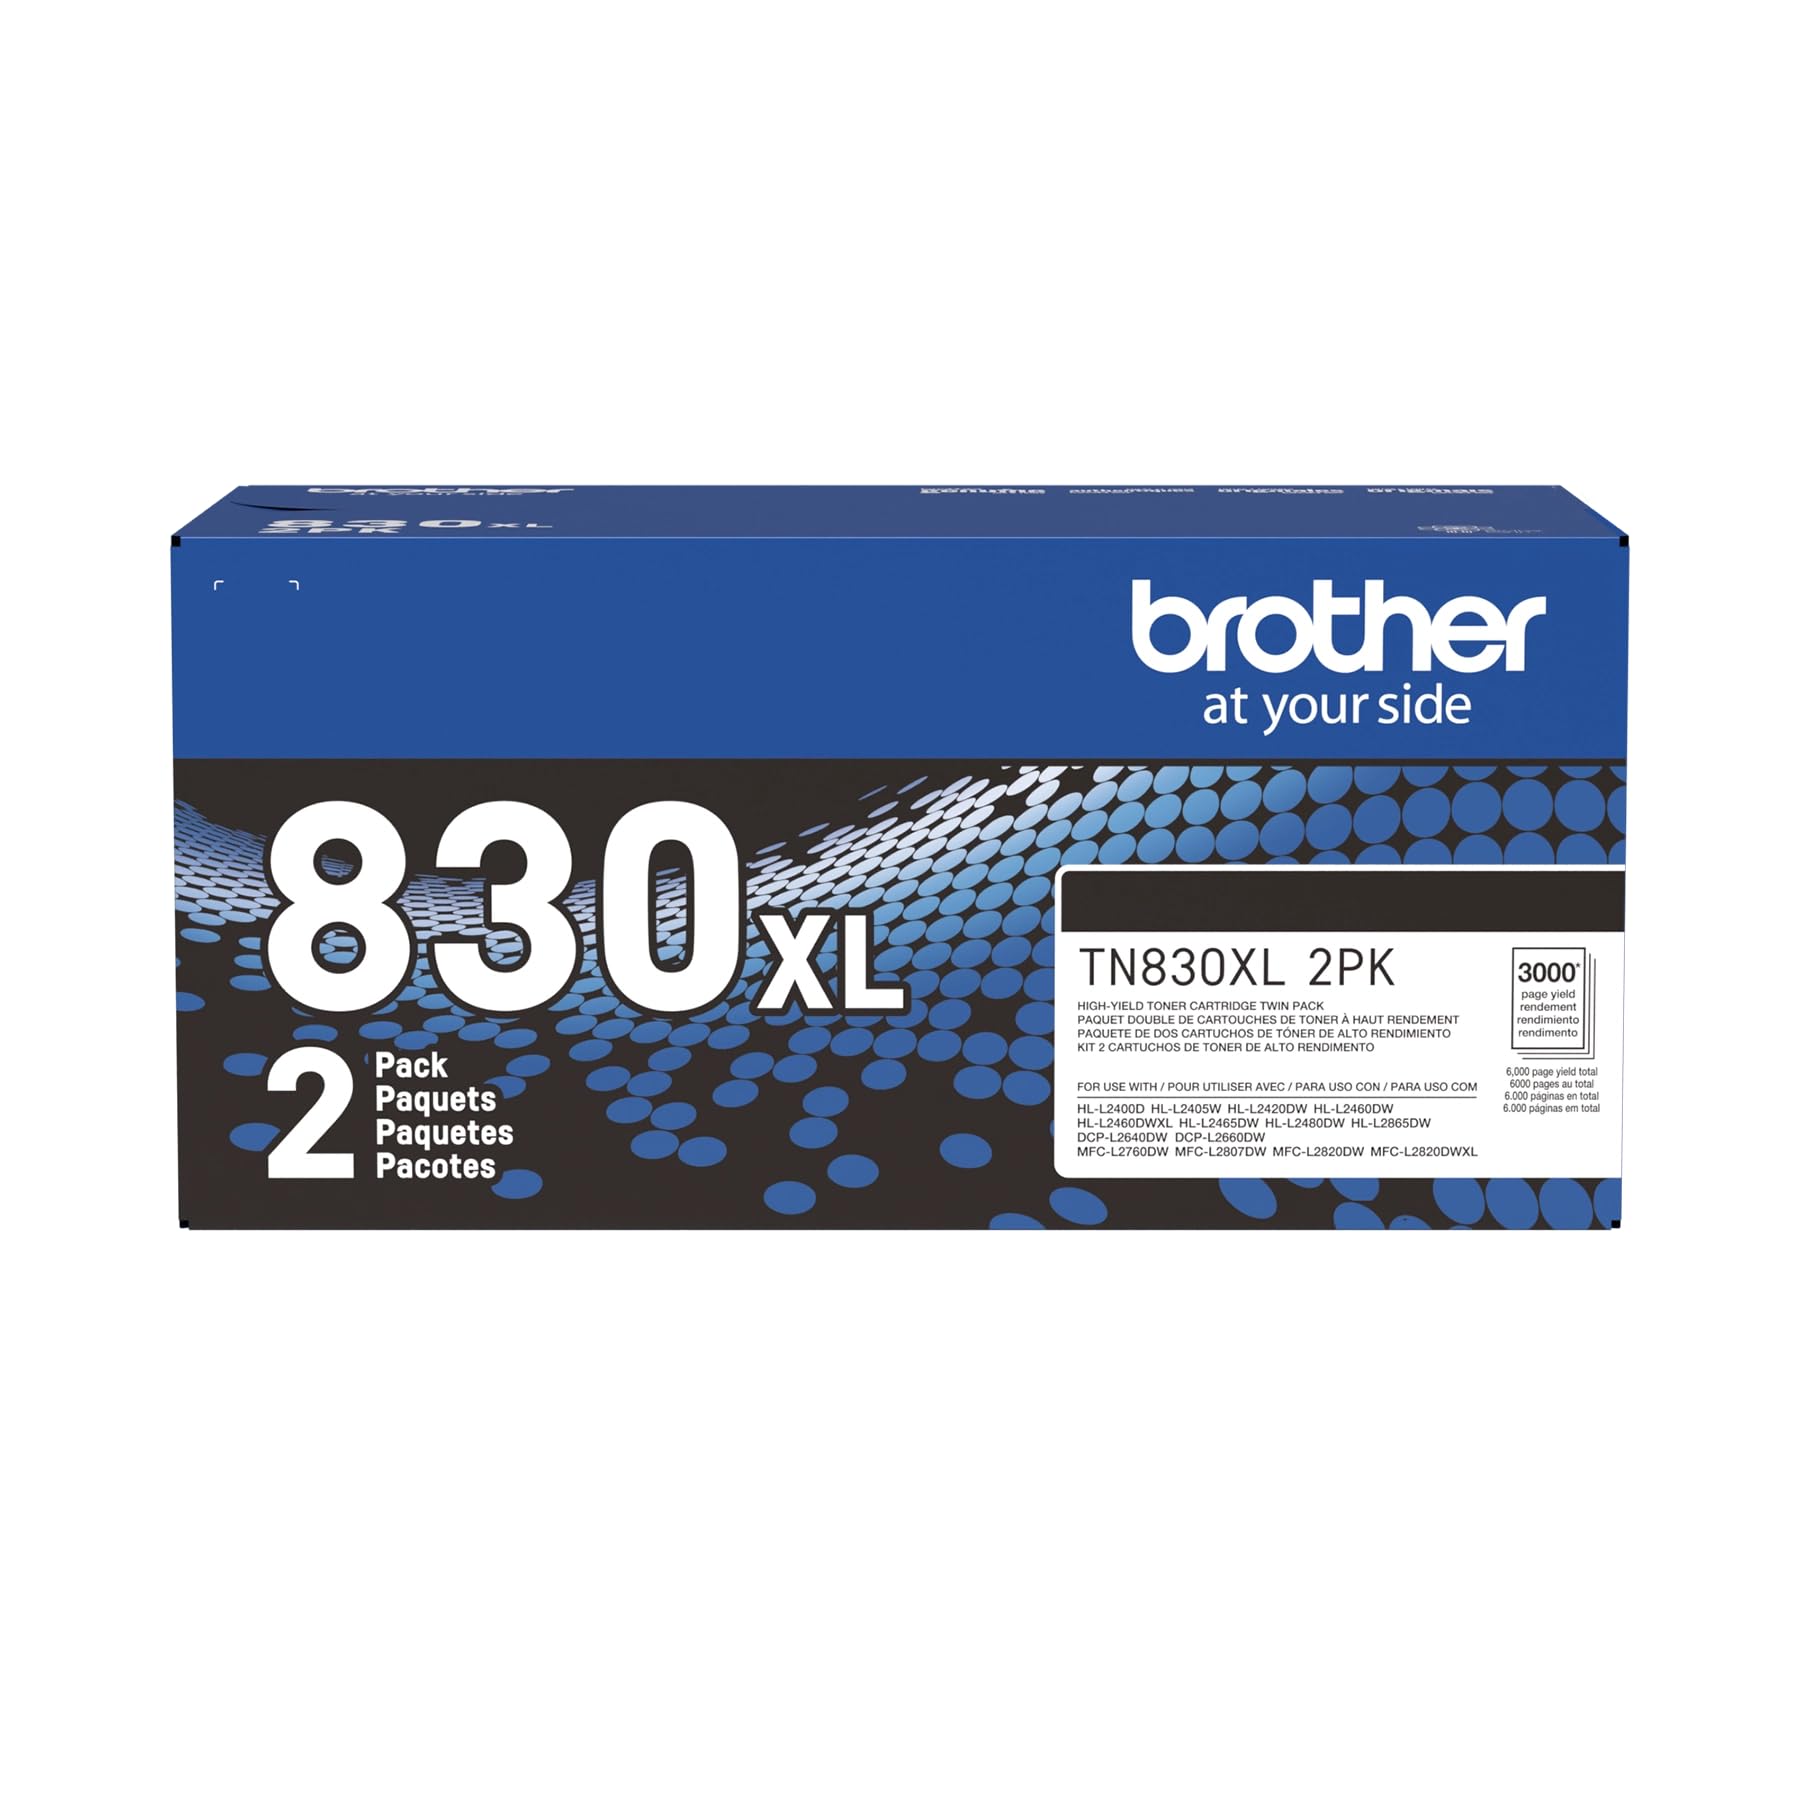 Brother Genuine TN830XL 2PK Black High Yield Printer Toner Cartridge 2-Pack – Print up to 3,000 Pages Each(1)